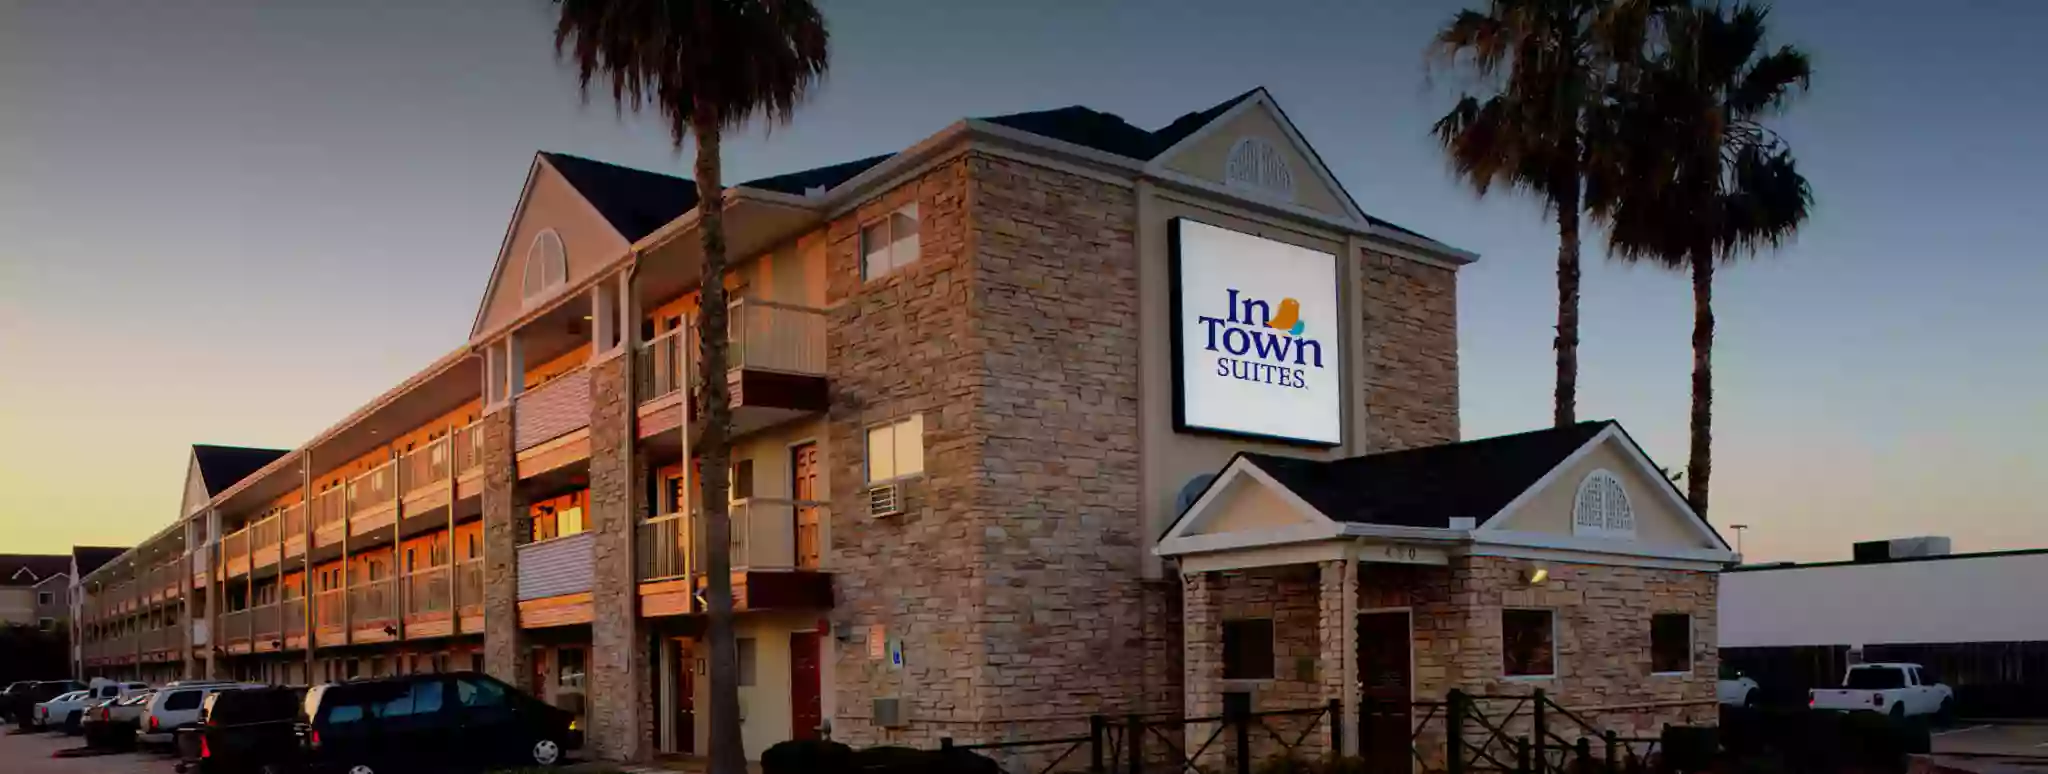 InTown Suites Extended Stay St. Louis MO - St. Charles